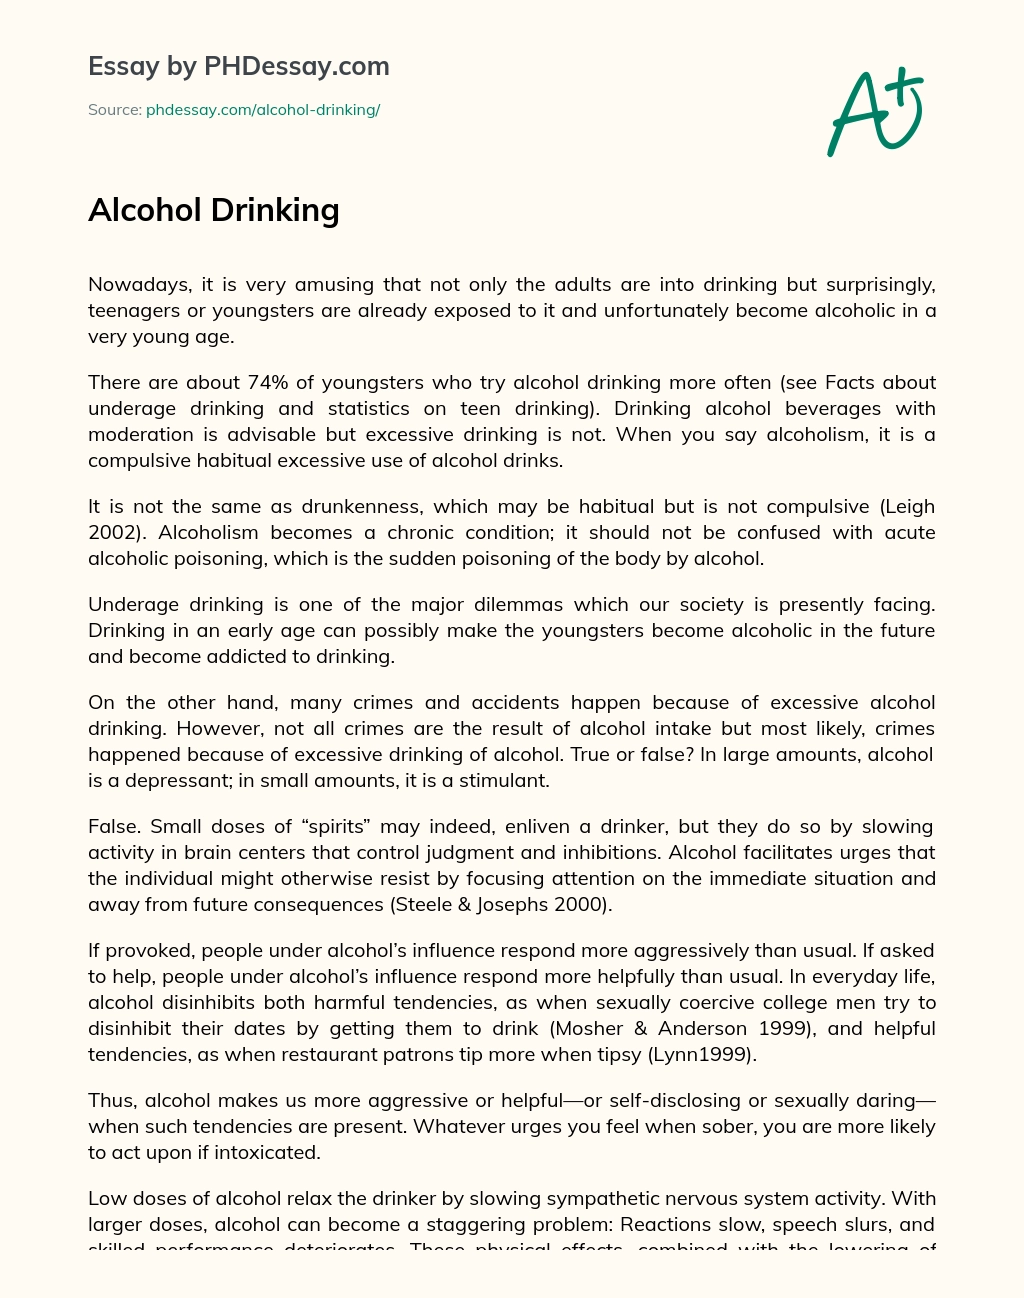 argumentative speech about drinking alcohol